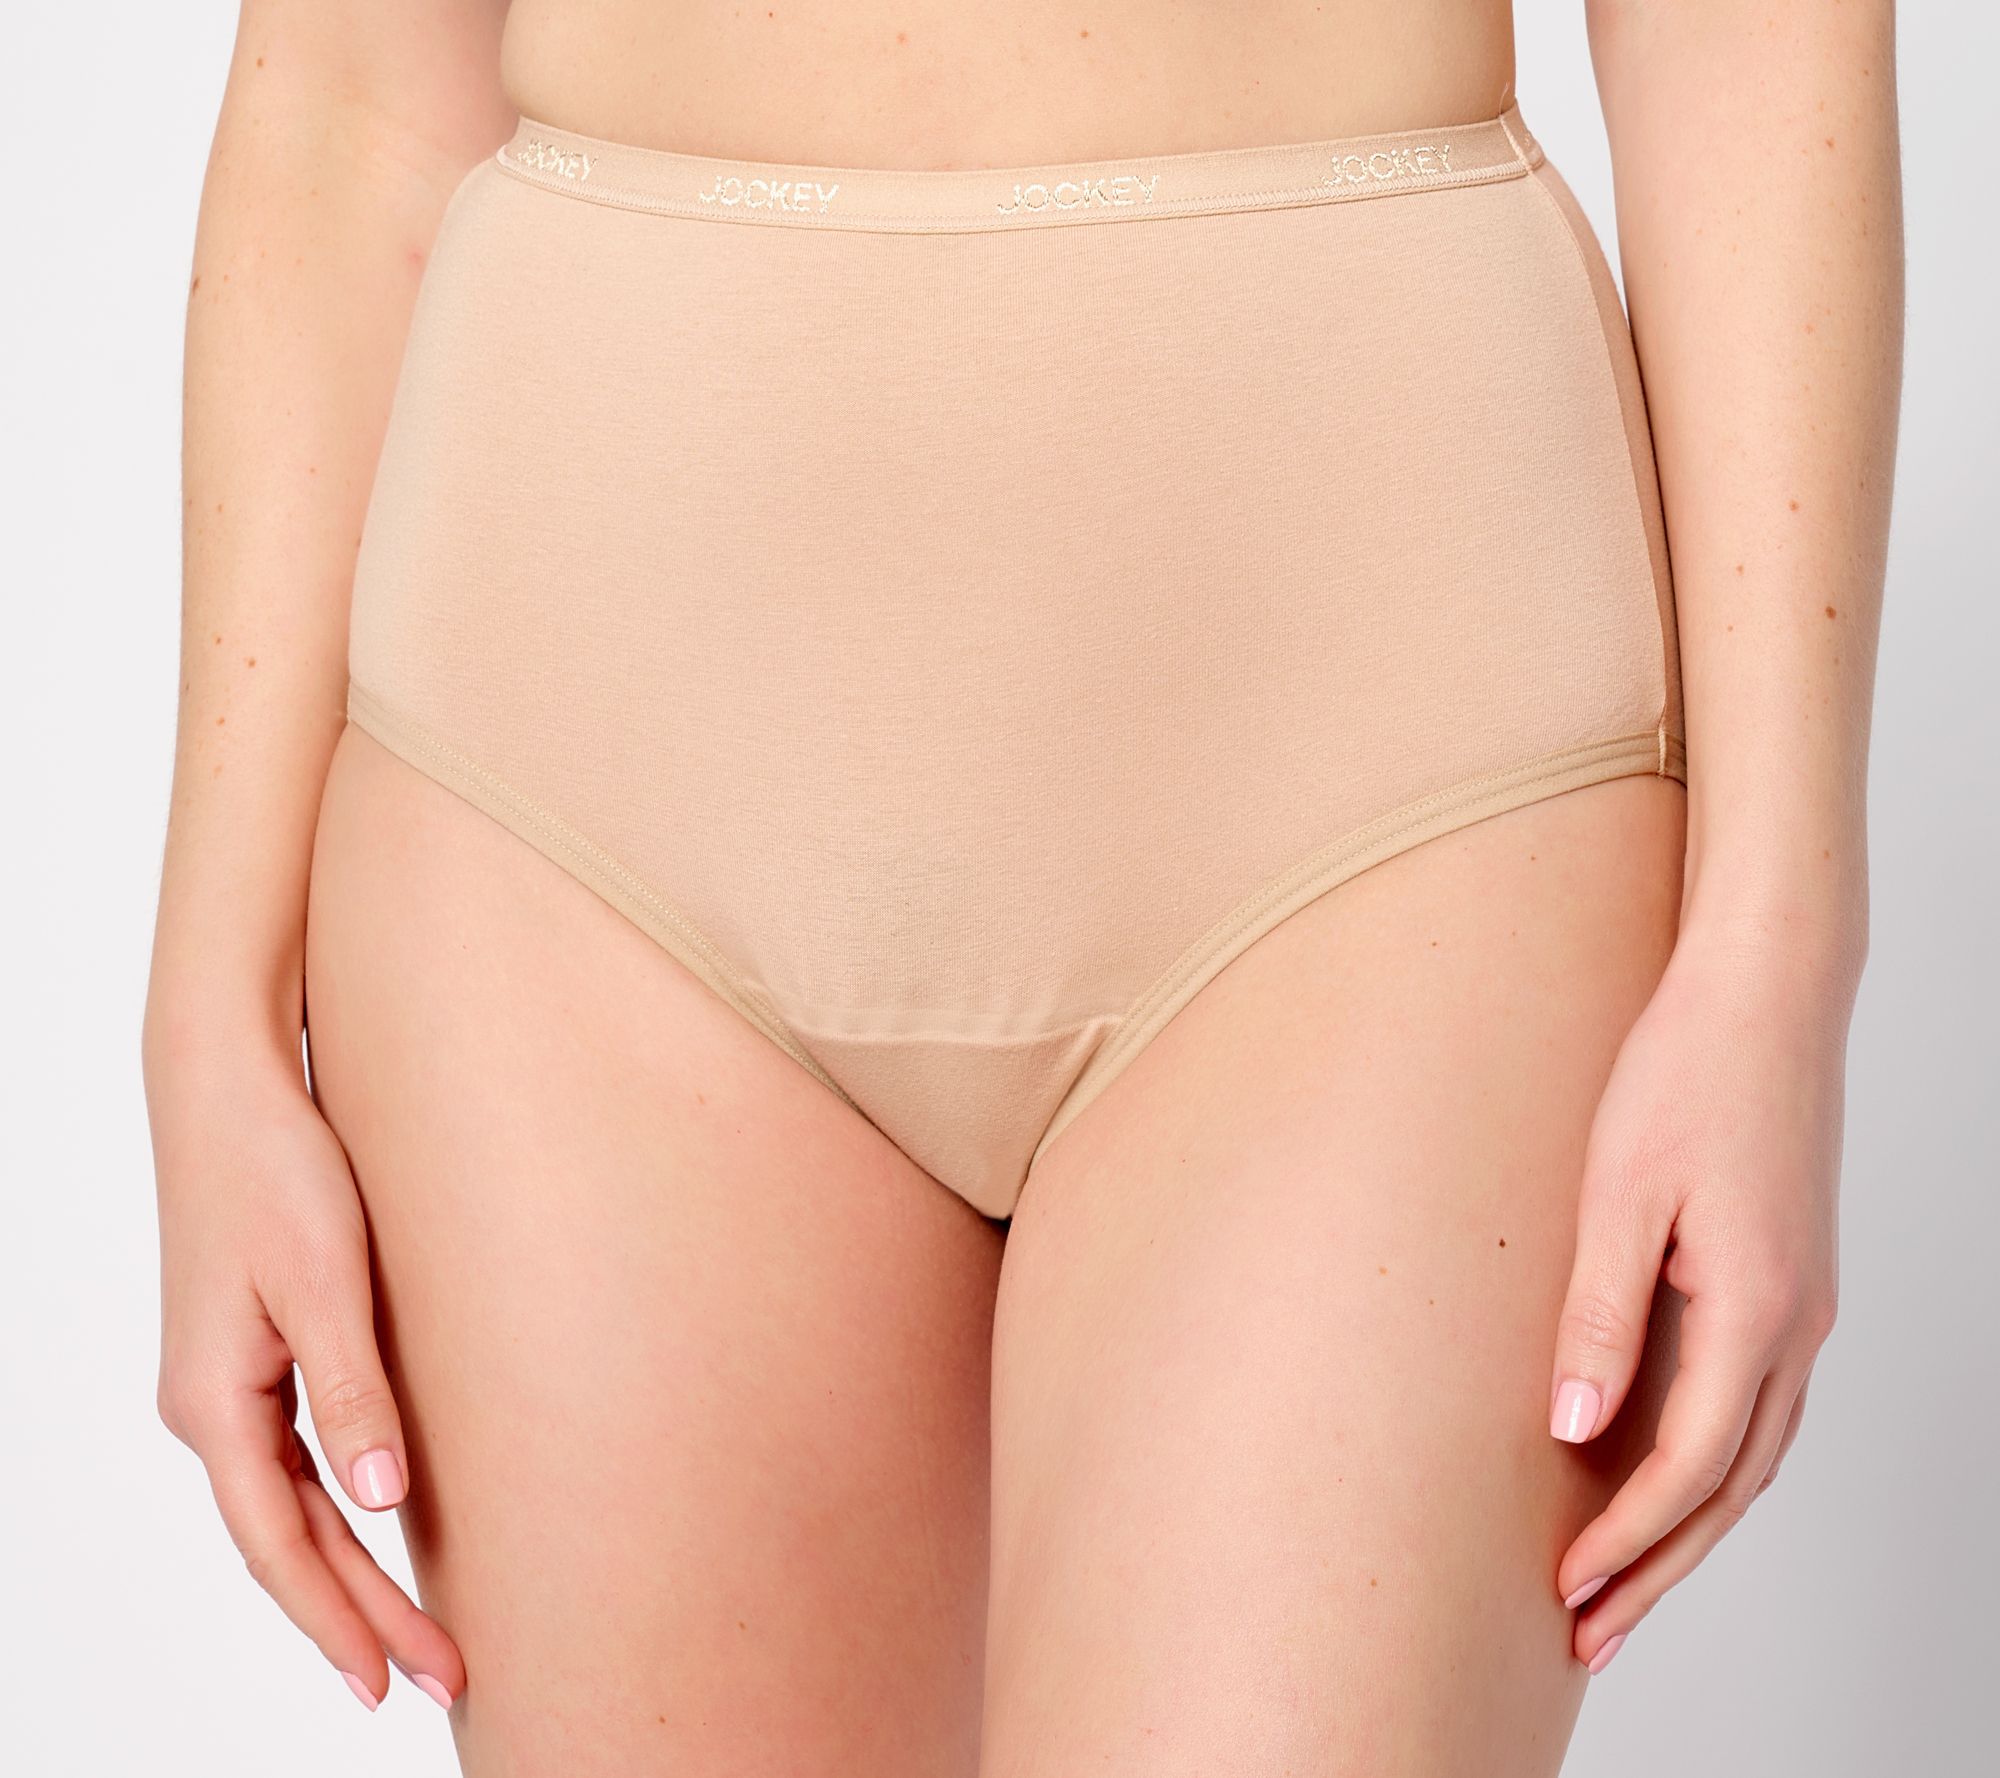 Up To 44% Off on Strapless Panties (2-, or 4-Pk.)